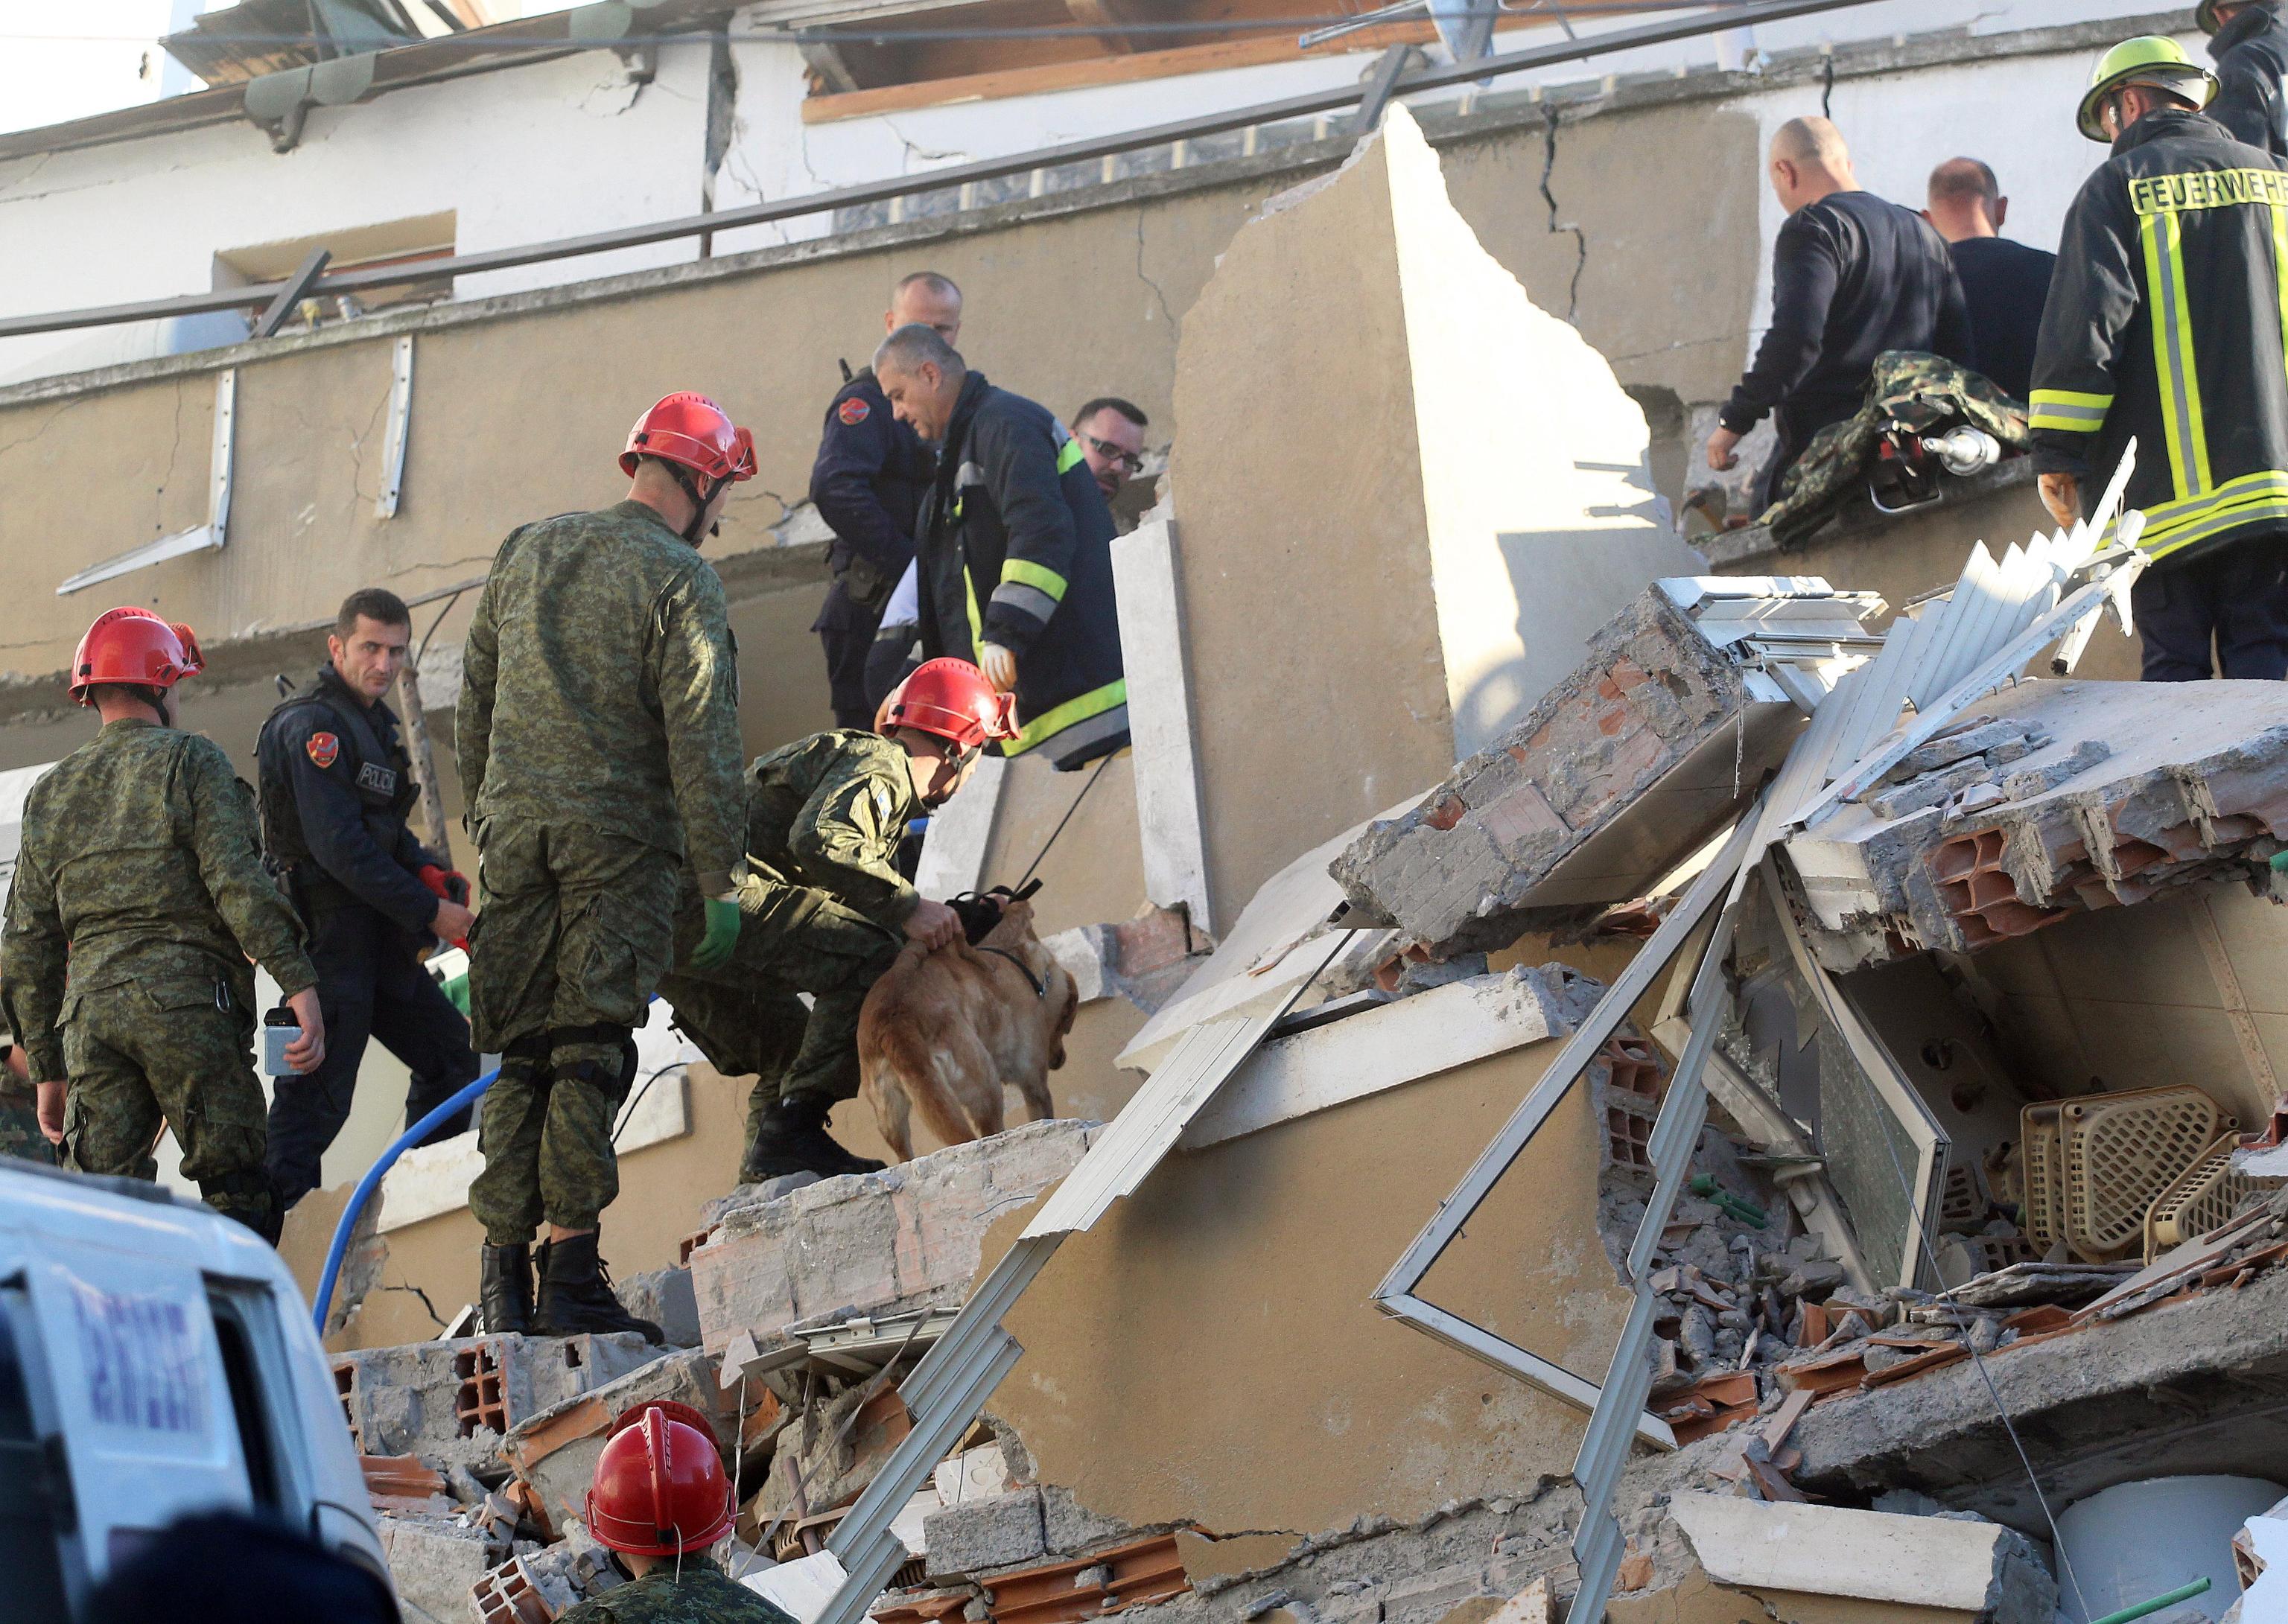 epa08027342 Rescue teams of firemen, army and police search for survivors in the rubble of a collapsed building after an earthquake in Durres, Albania, 26 November 2019. Albania was hit by a 6.4 magnitude earthquake on 26 November 2019, the strongest recorded in decades. According to reports, at least 18 people have died and several are injured in the eartquke EPA/MALTON DIBRA